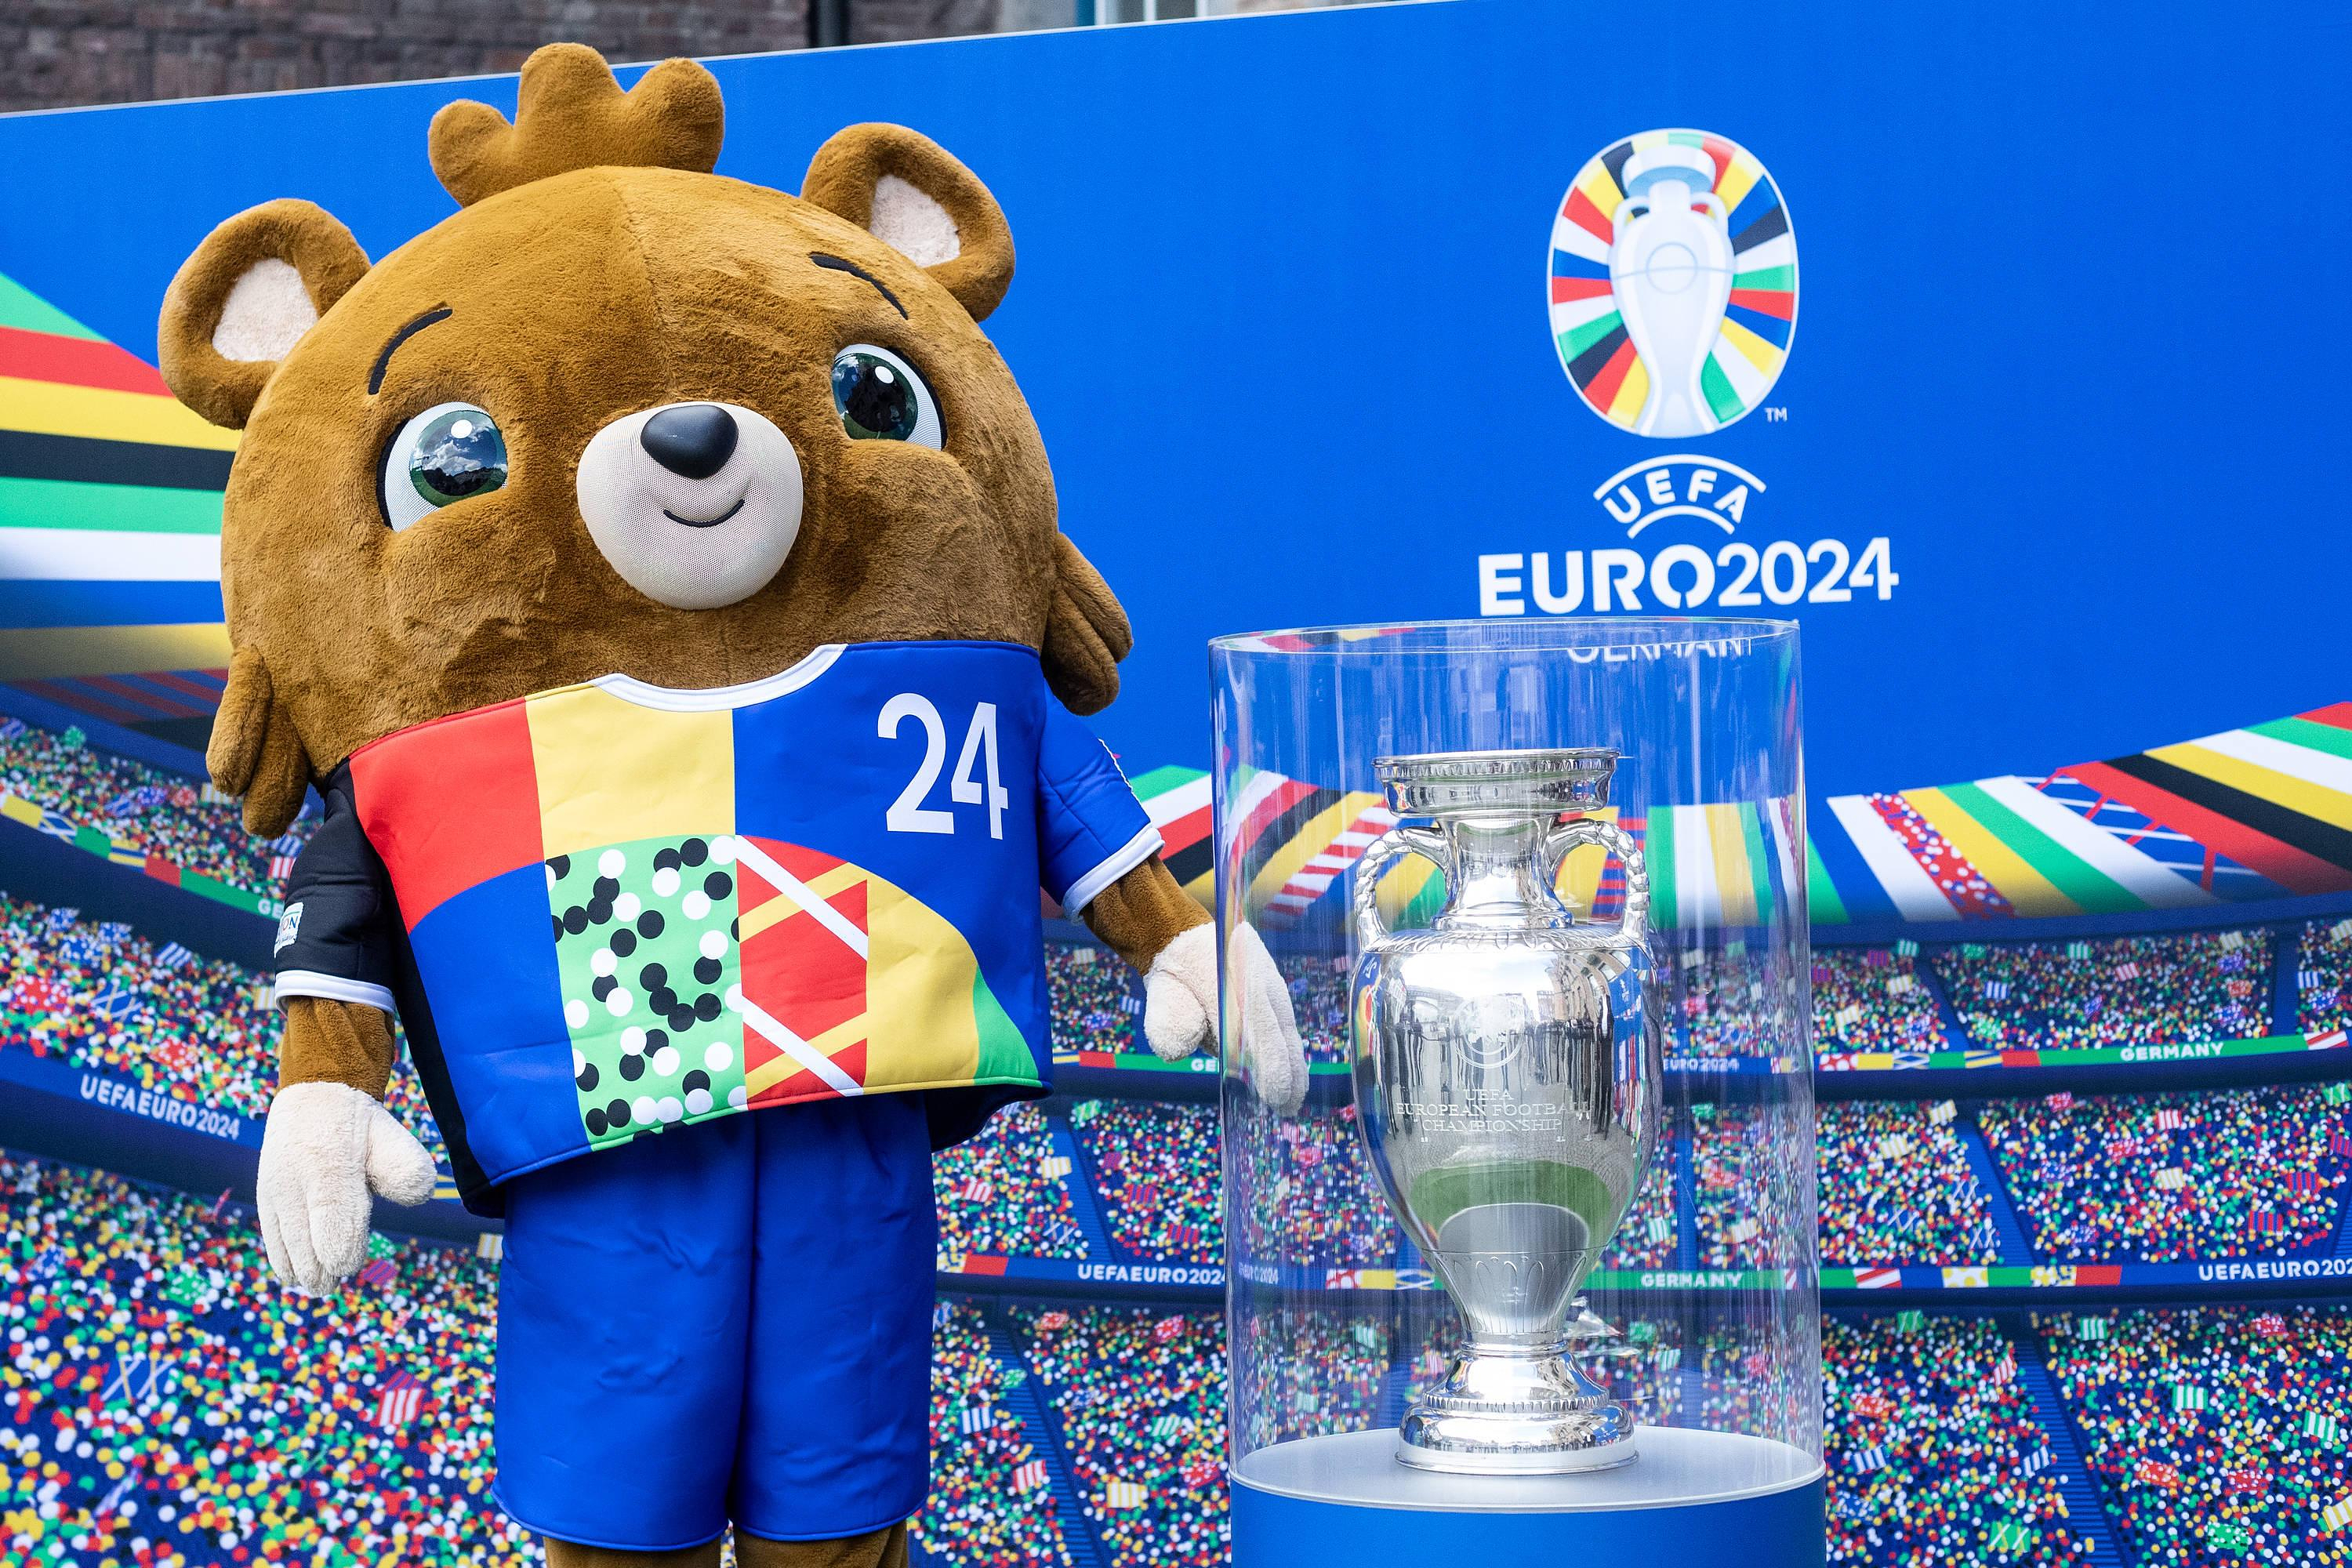 Football: UEFA favors lists of 26 players for Euro 2024